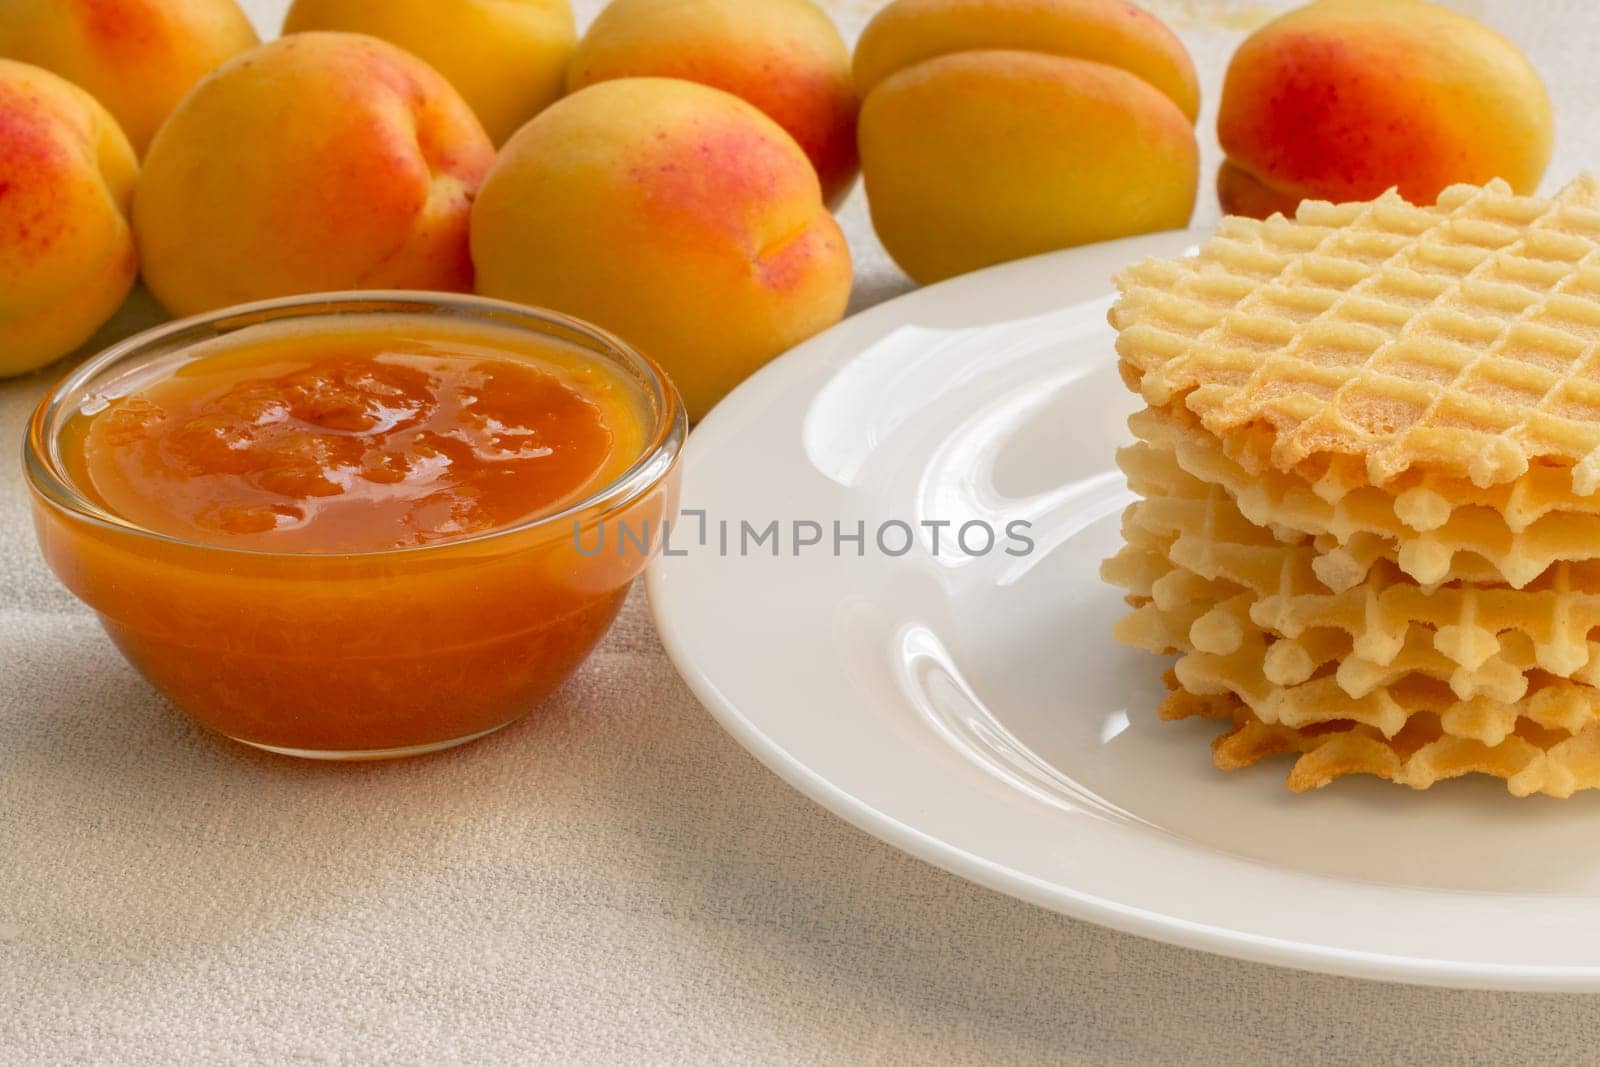 Homemade cookies with apricot jam on a plate by Snegok1967